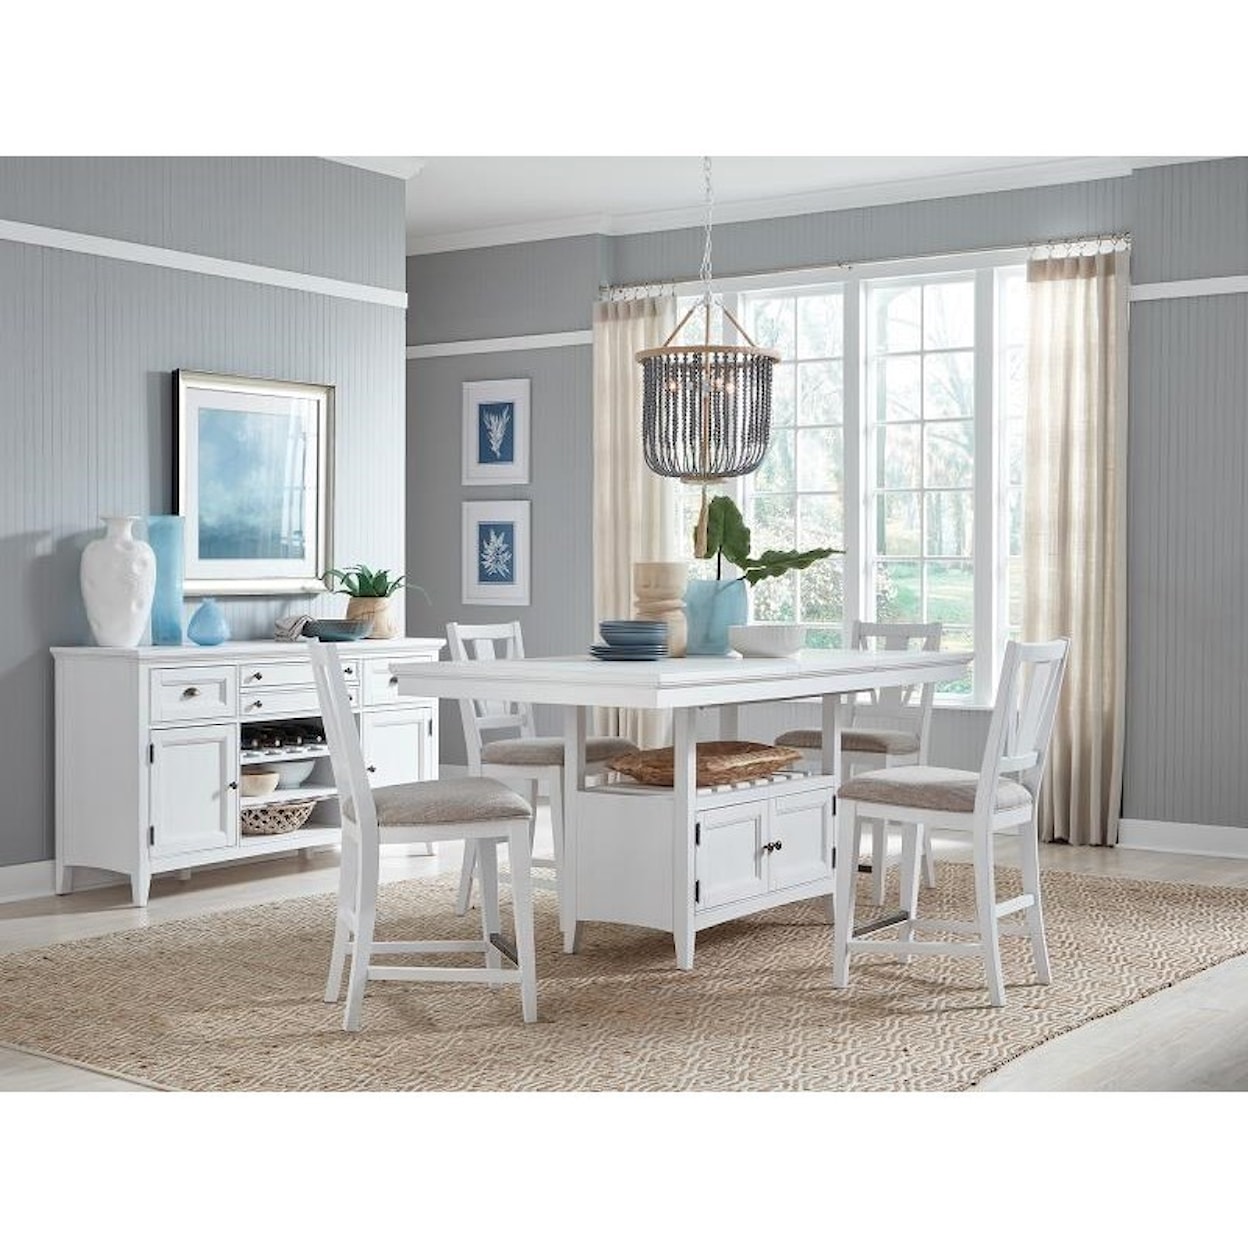 Magnussen Home Heron Cove Dining Dining Room Group